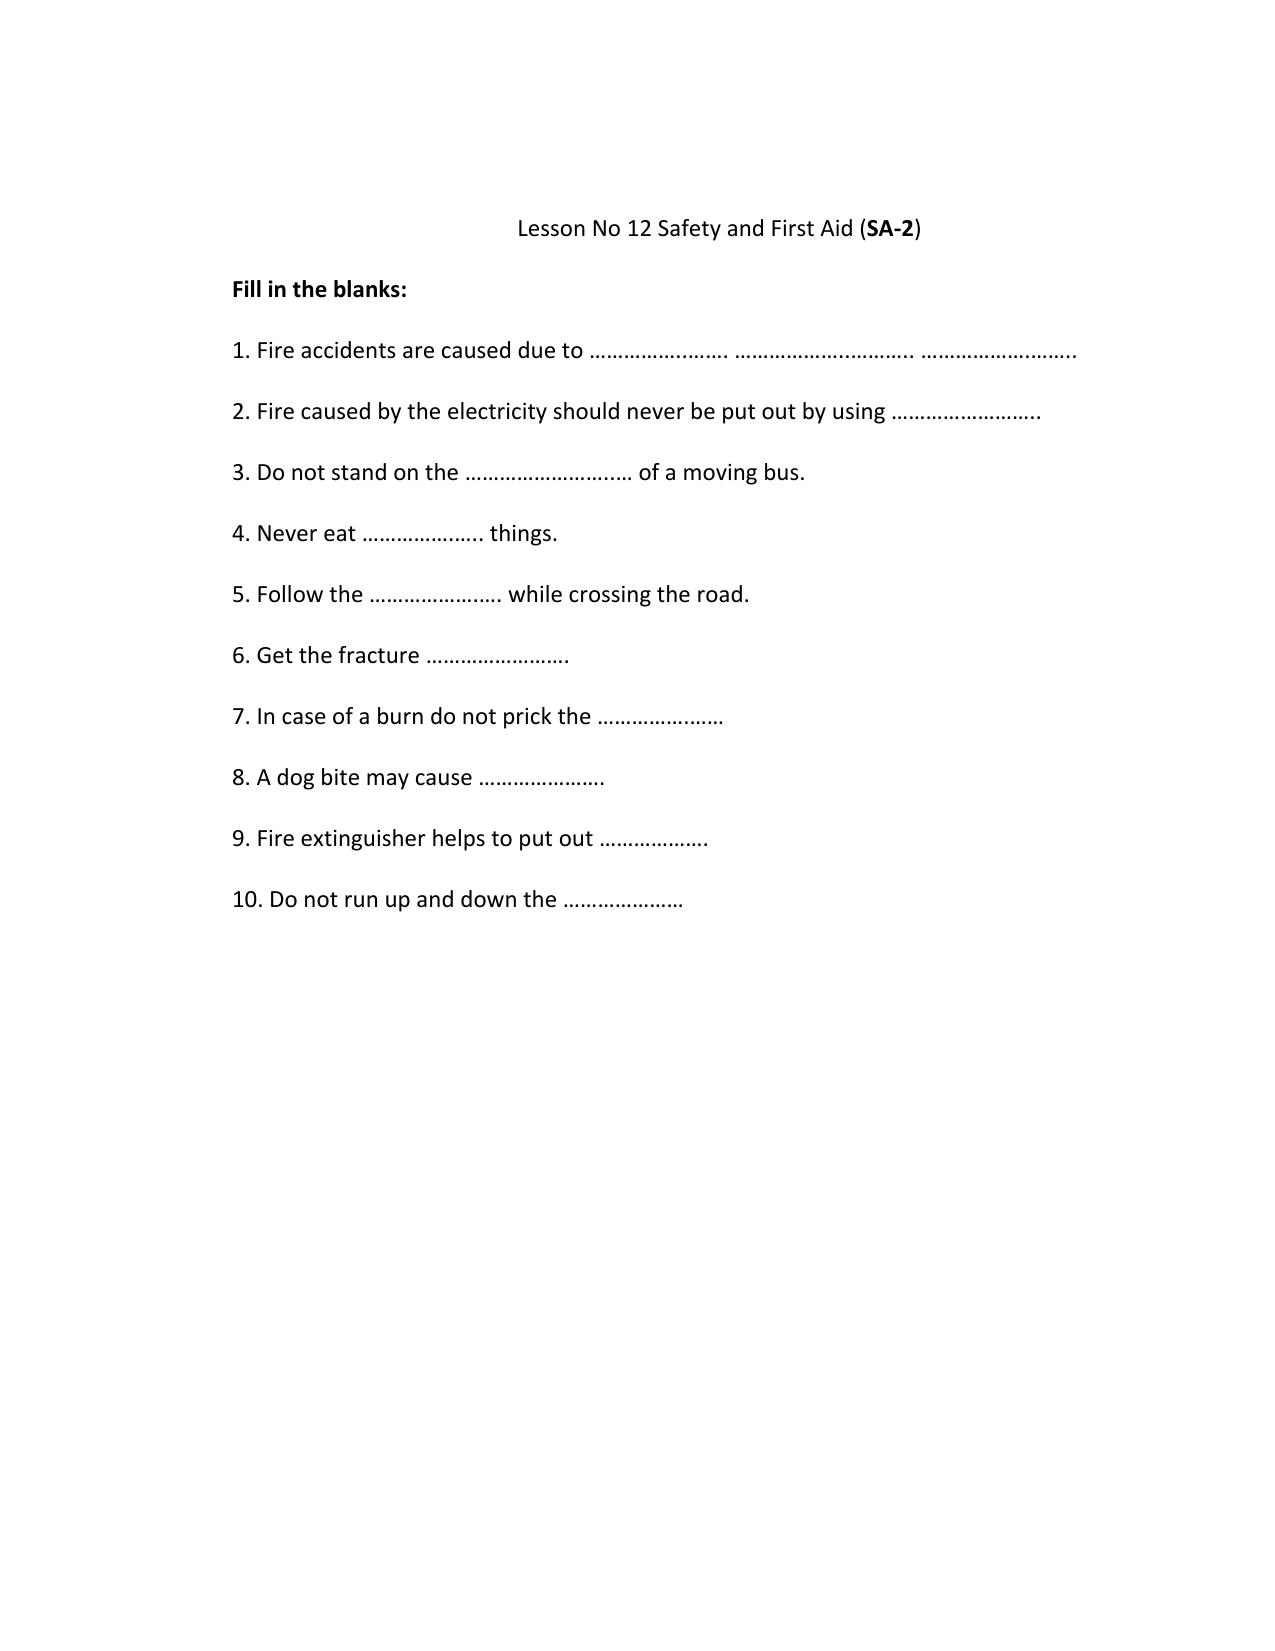 Worksheet for Class 5 Science Safety and First Aid Assignment 2 - Page 1